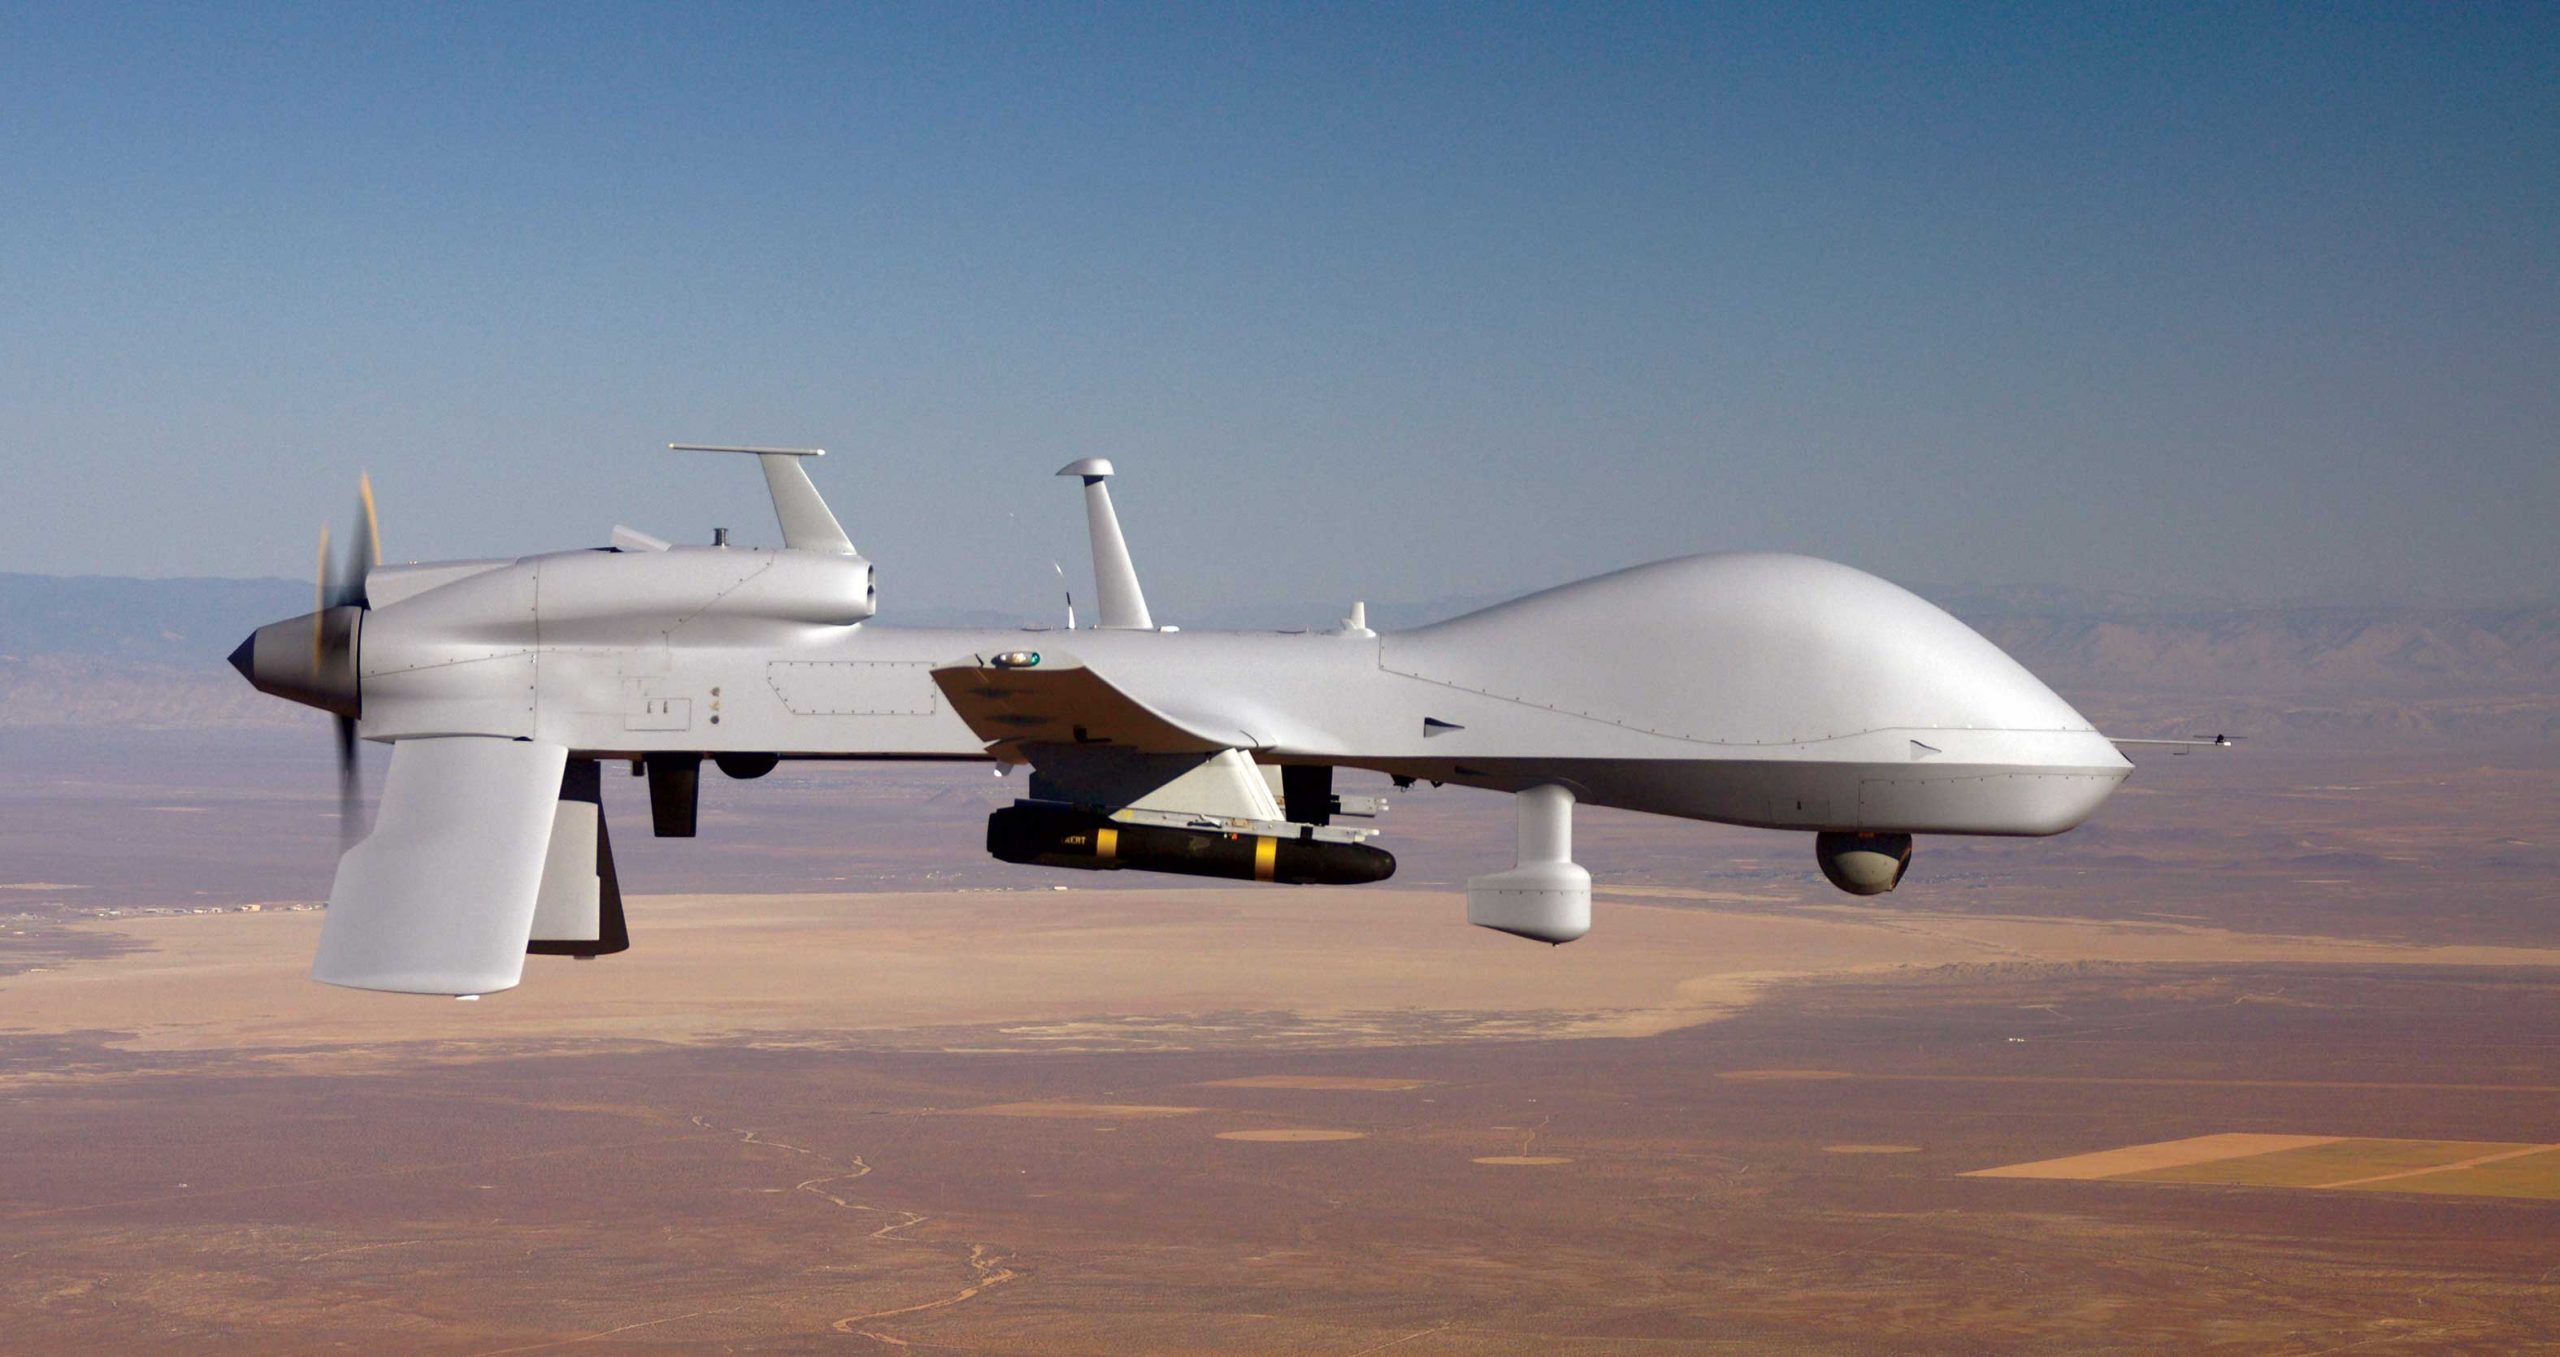 The Army makes use of UAVs like the MQ-1C Gray Eagle Unmanned Aircraft System. Photo via U.S. Army.